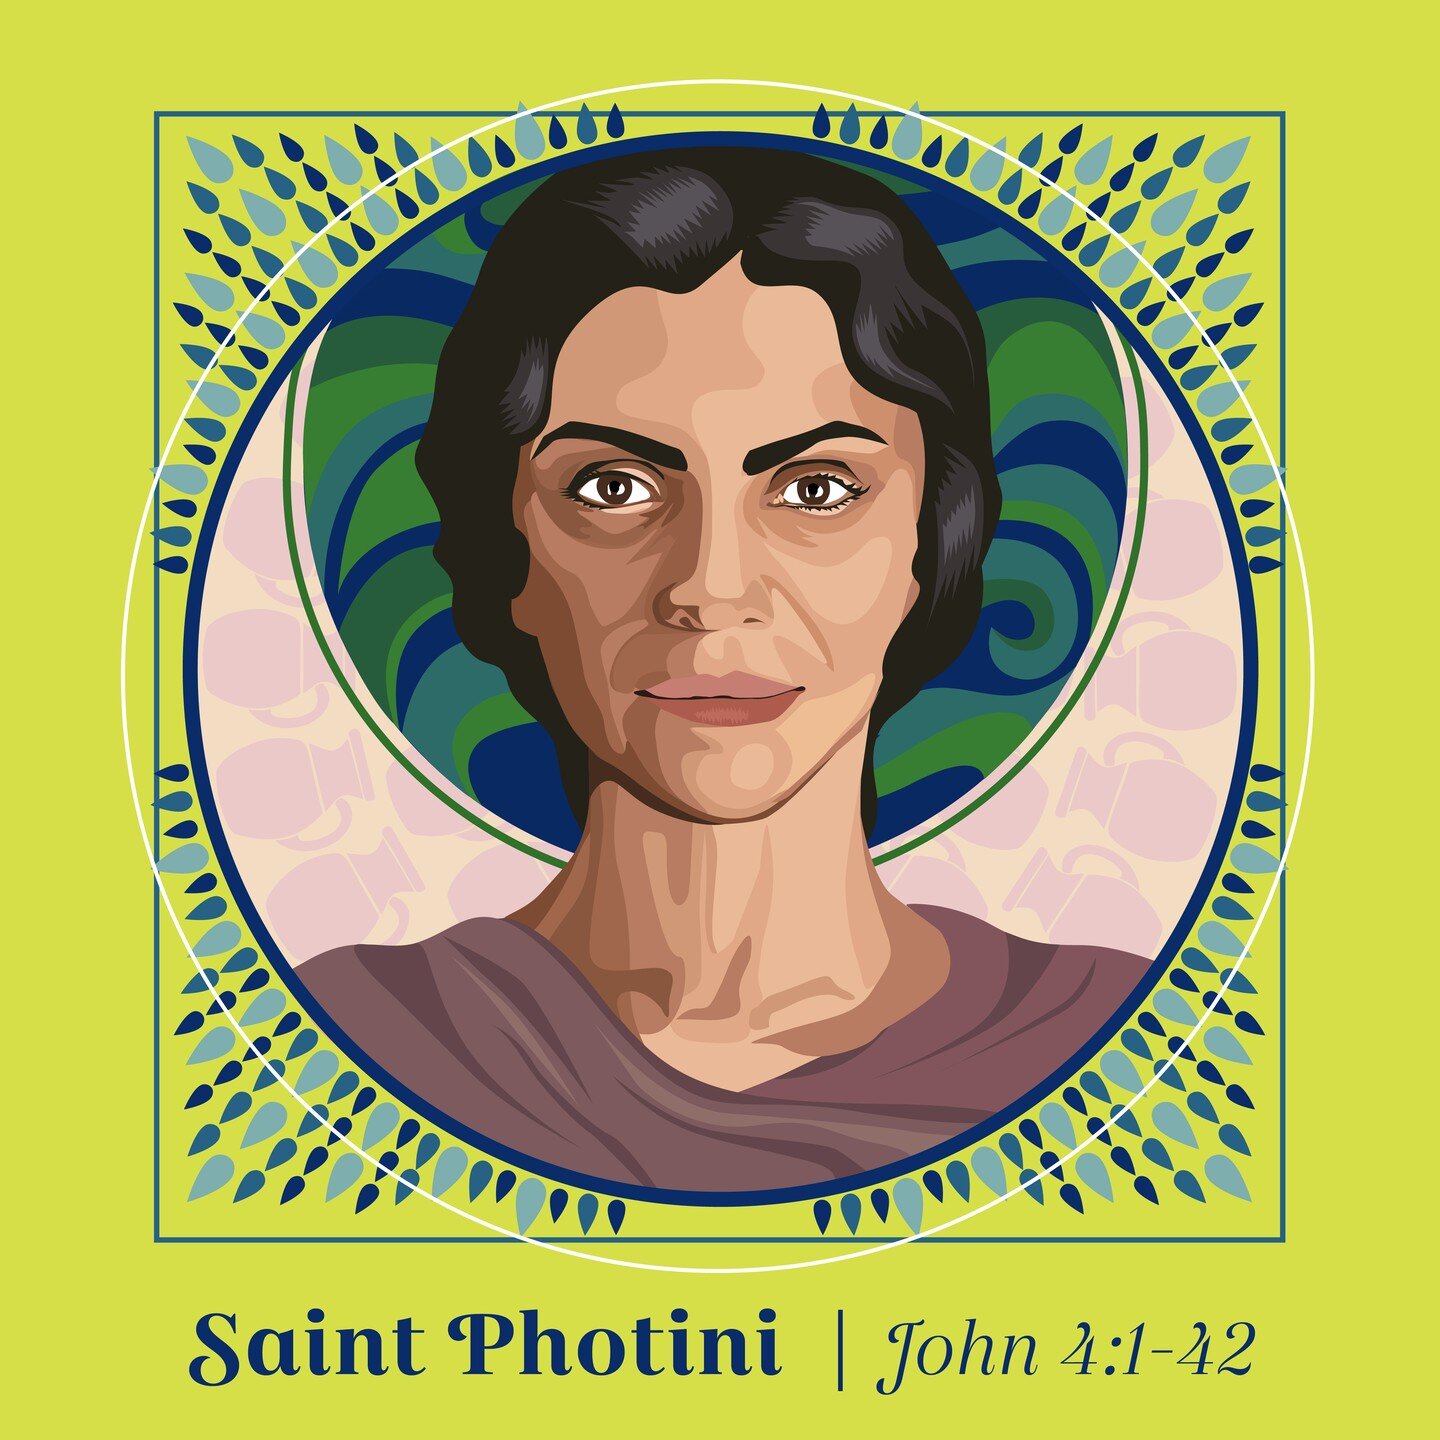 Happy Feast to St. Photini (aka woman at the well from John 4)! 🎉💧

Photini is commemorated on February 26th in the Orthodox Church. 

Her story is one that has been deeply misunderstood. 

Her branding as an adulterer or sinful woman is wrong and 